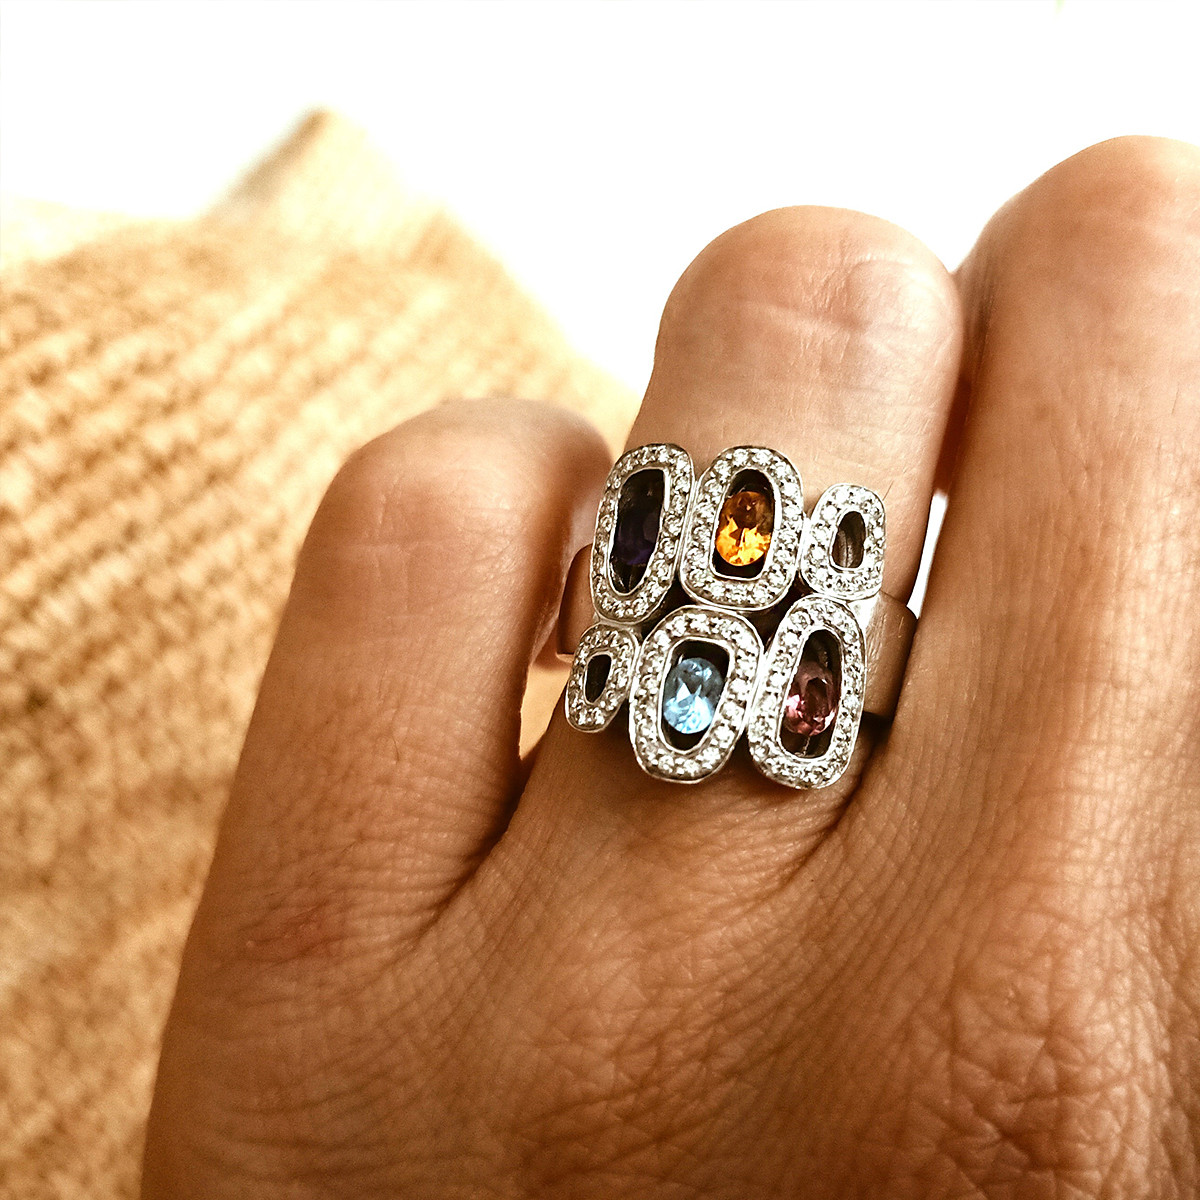 DESIGN RING WITH COLORED STONES AND DIAMONDS